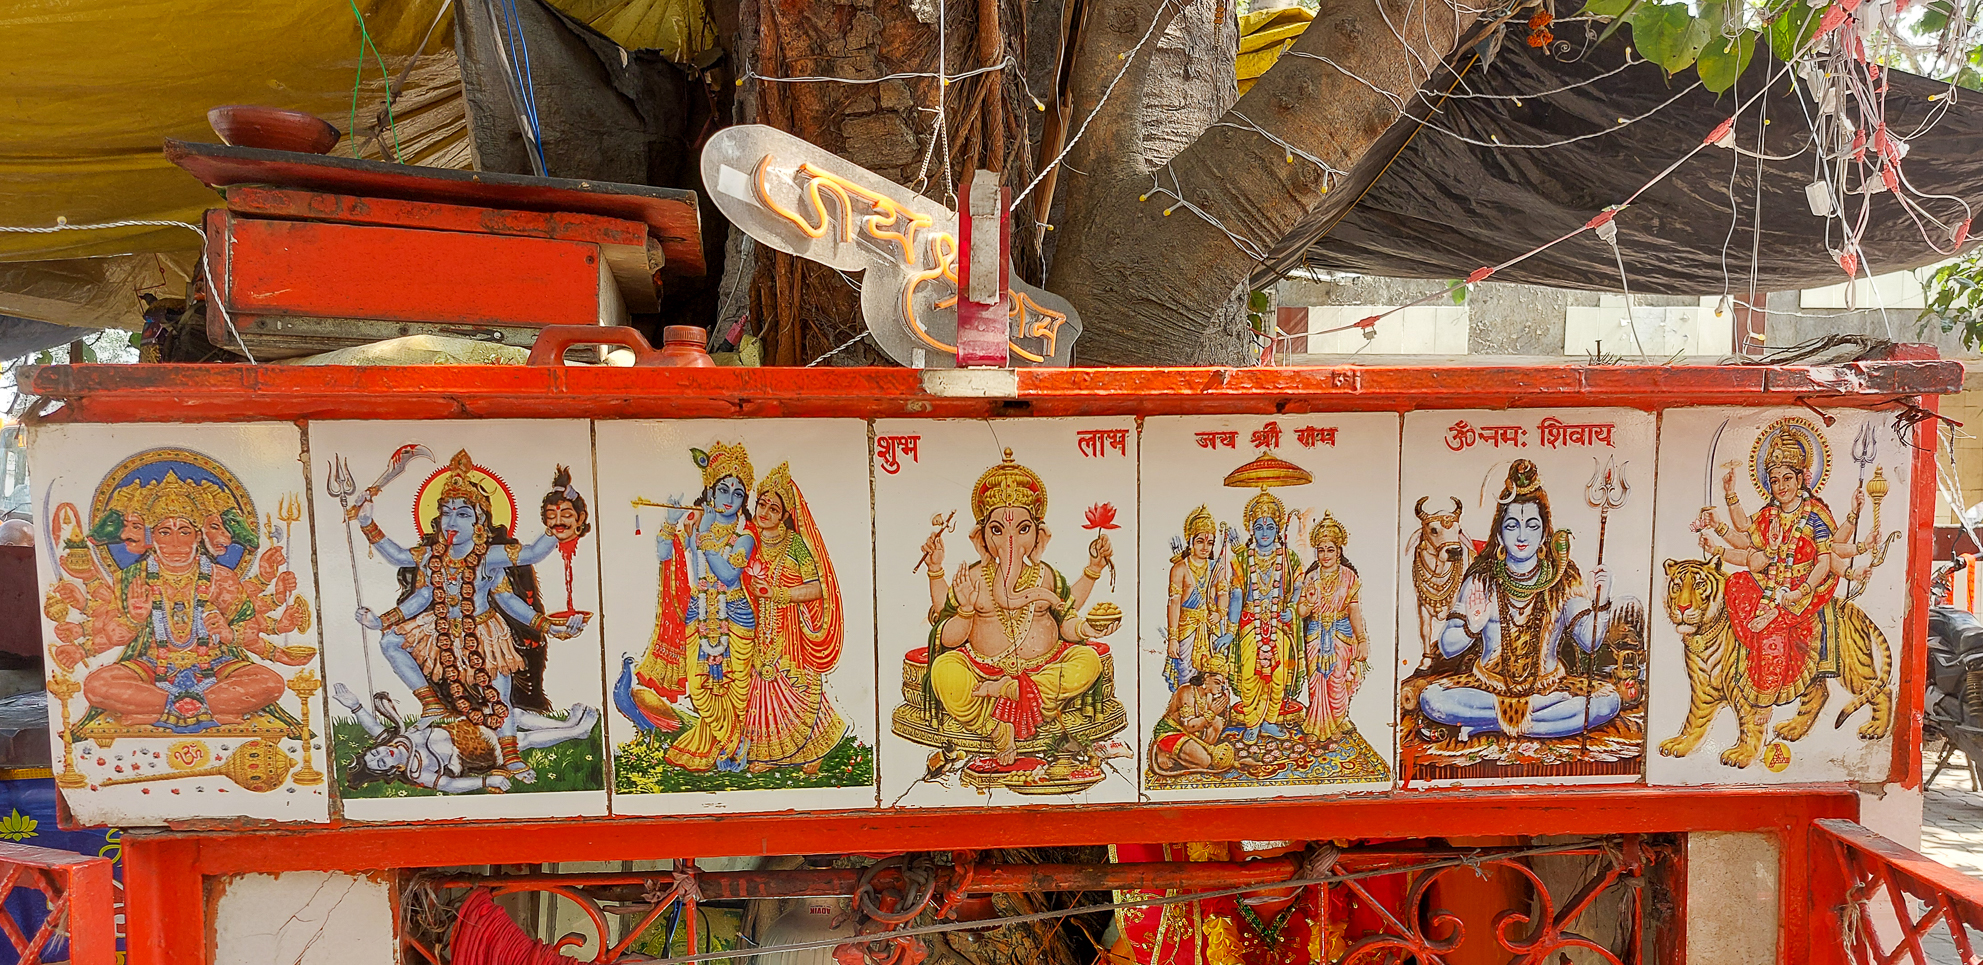 <span  class="uc_style_uc_tiles_grid_image_elementor_uc_items_attribute_title" style="color:#ffffff;">The Hindi do have hundreds of goods, hereby some important ones (Brahma, Shiva, Parvati, Ganesha &amp; Co.)</span>